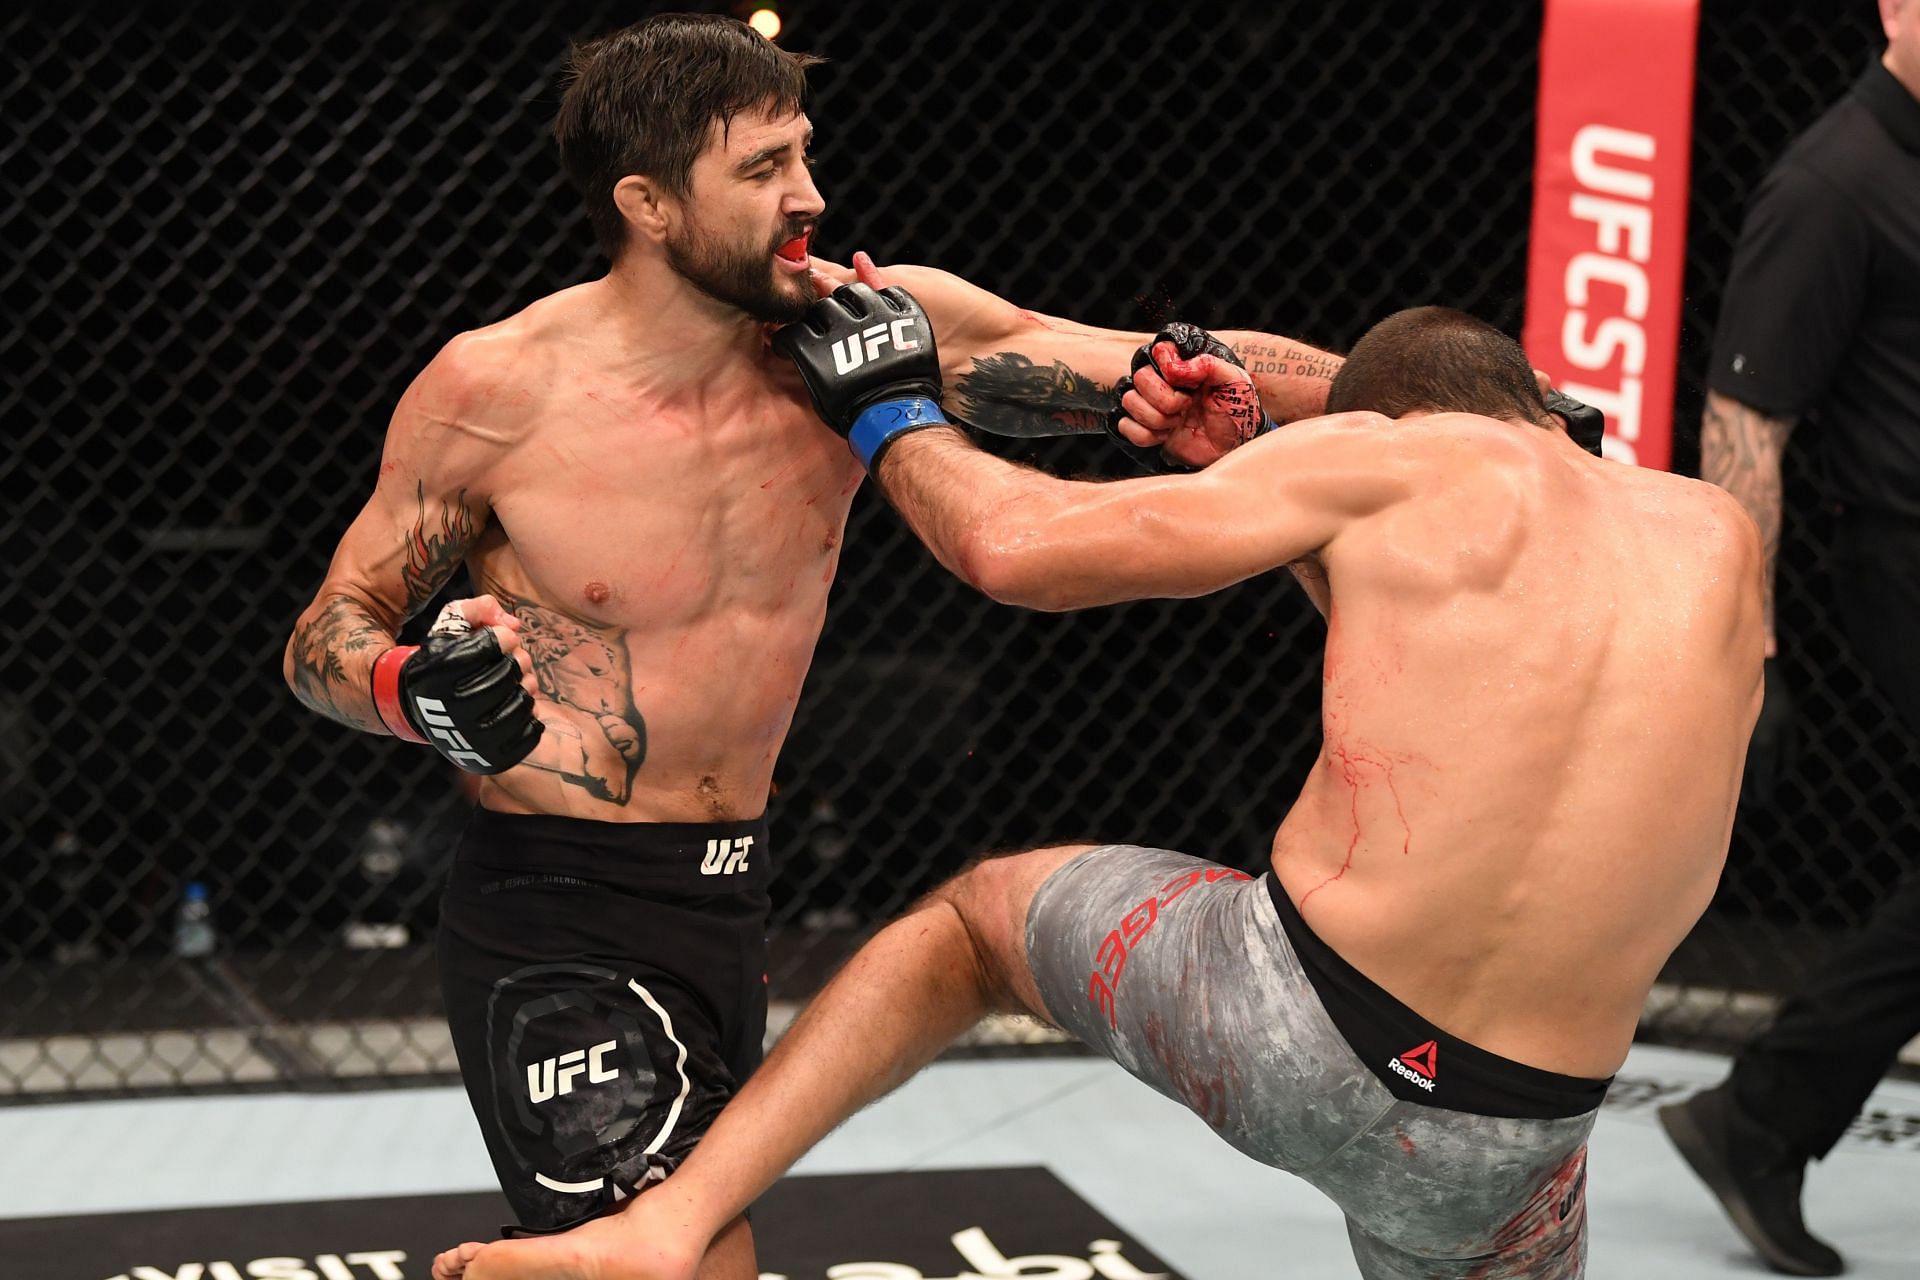 Carlos Condit won his shootout with Dan Hardy with a vicious left hand